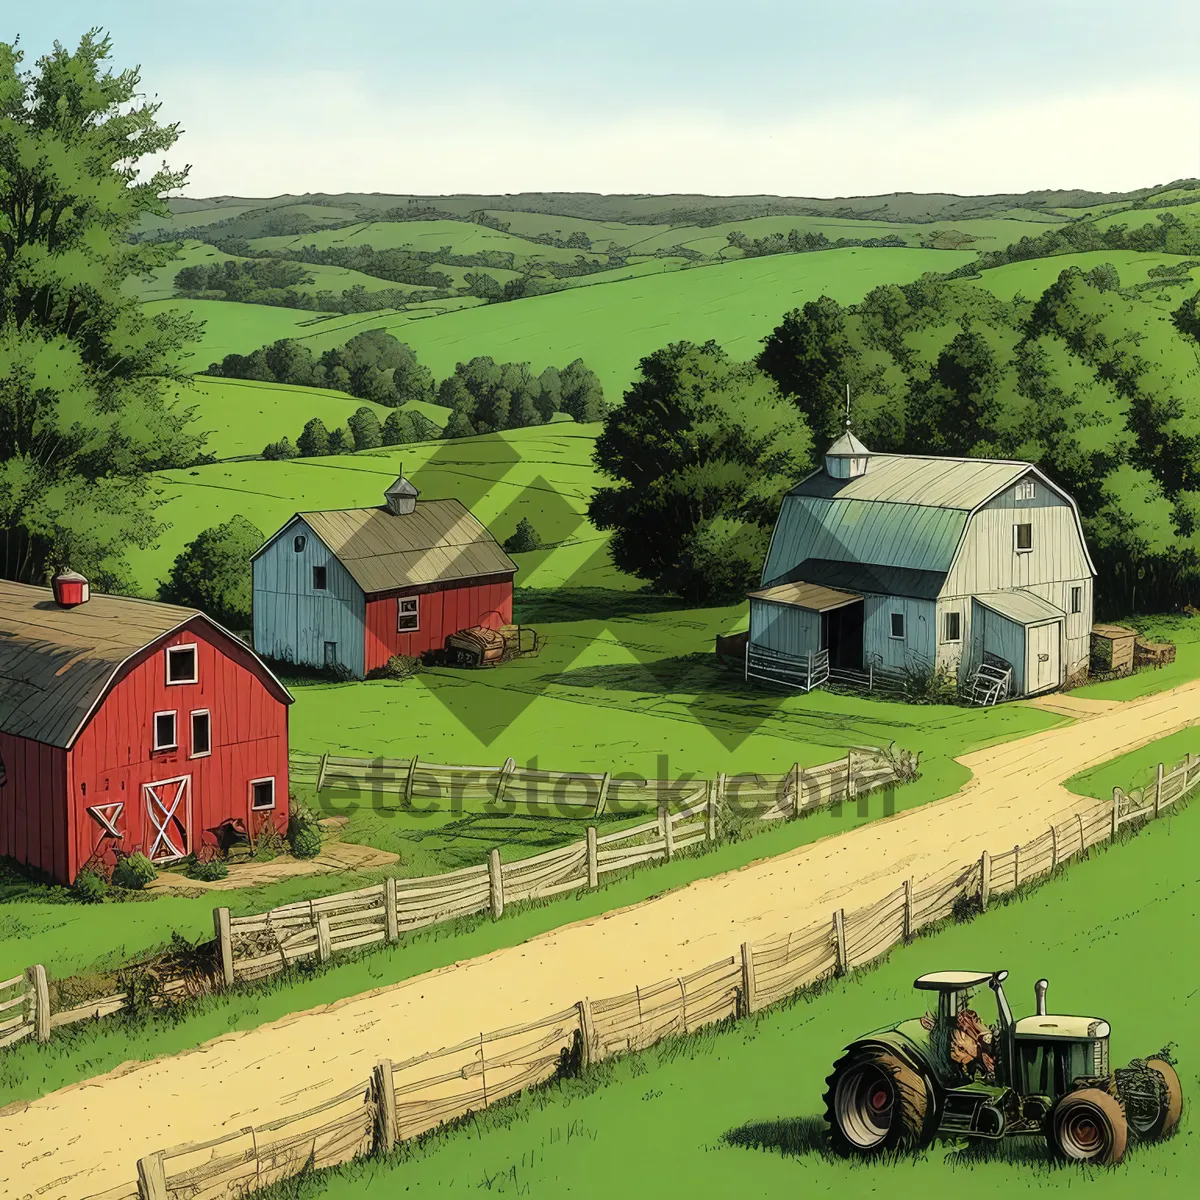 Picture of Rural Farm Landscape with Barn and Harvesting Equipment